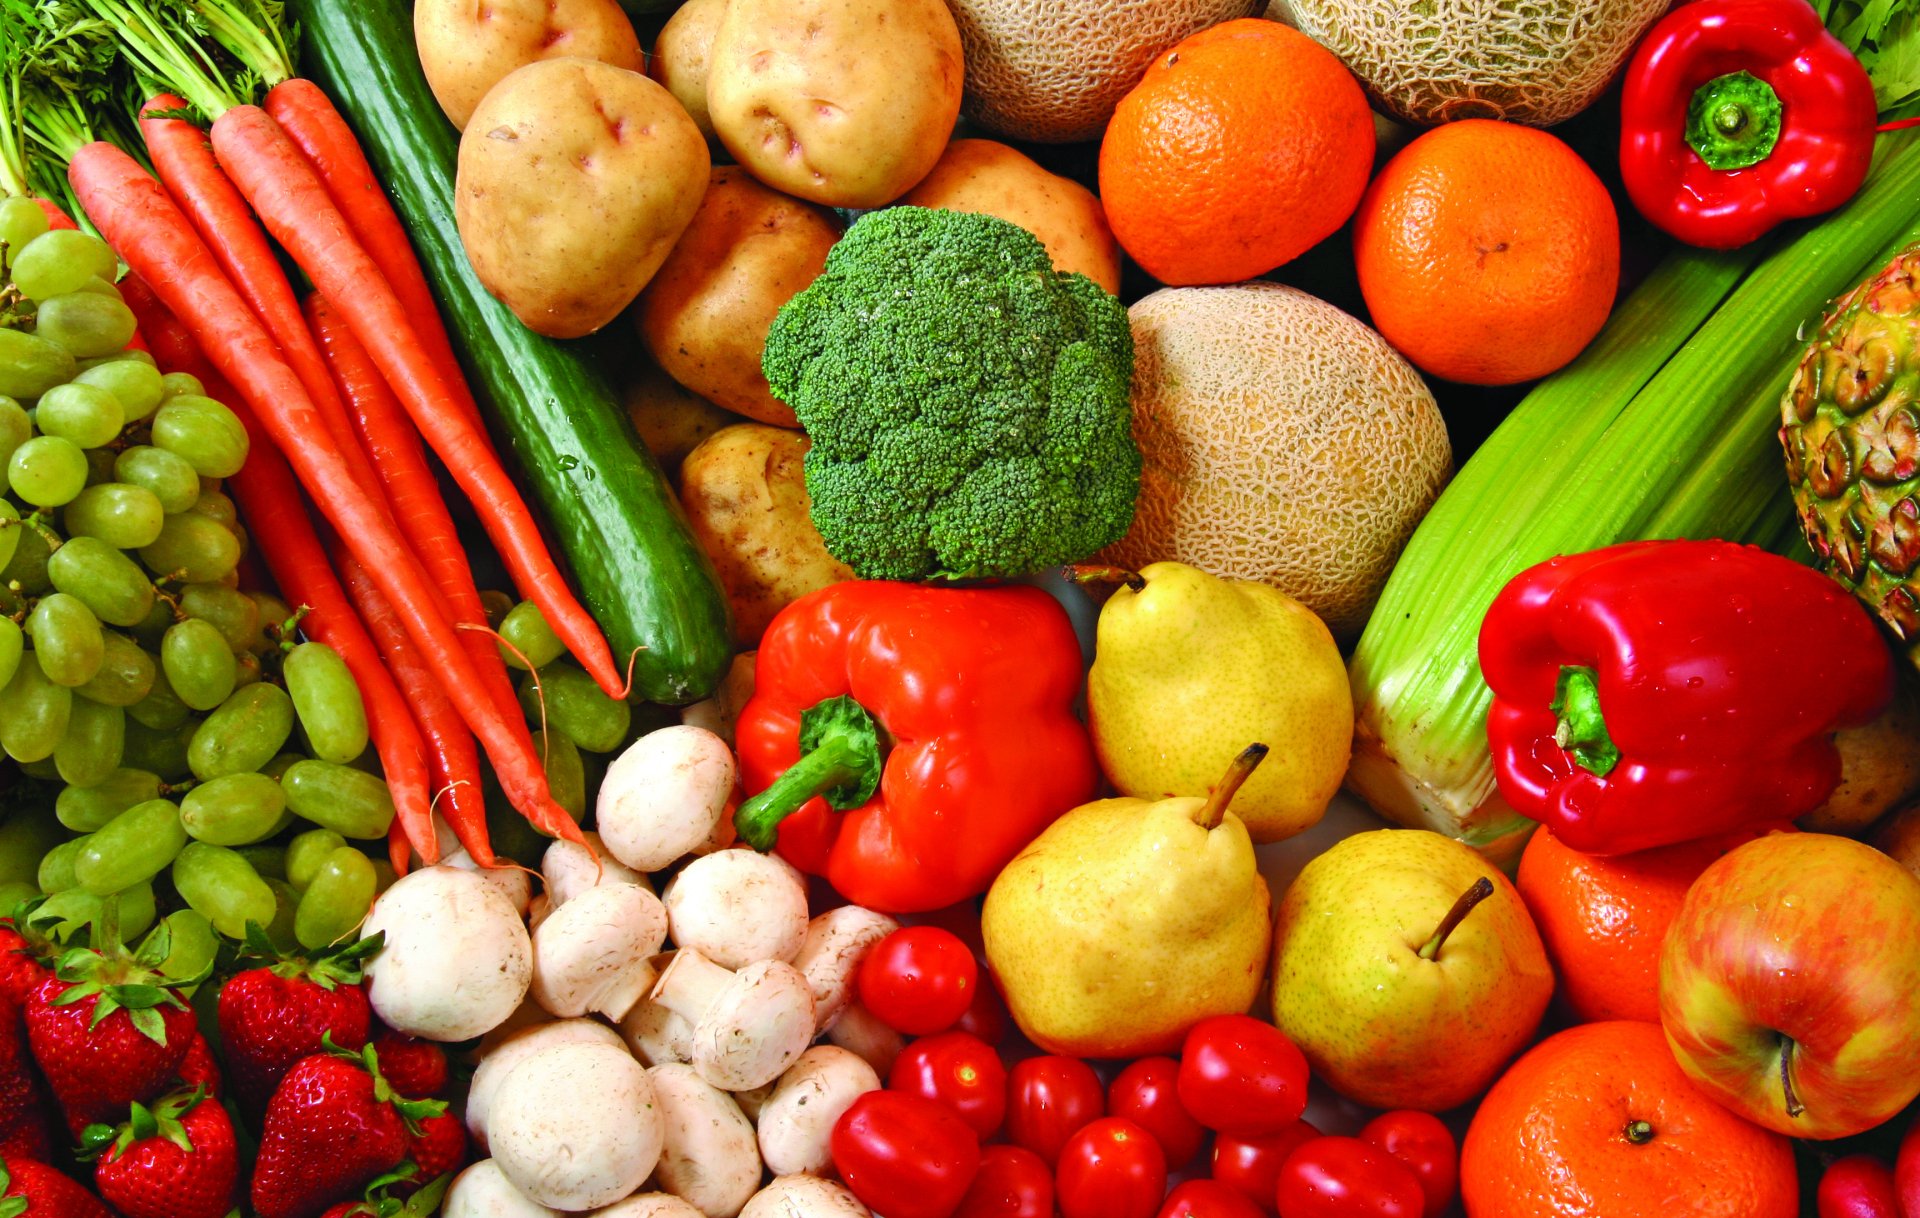 10 Healthy Vegetables You Should Add to Your Shopping List Today